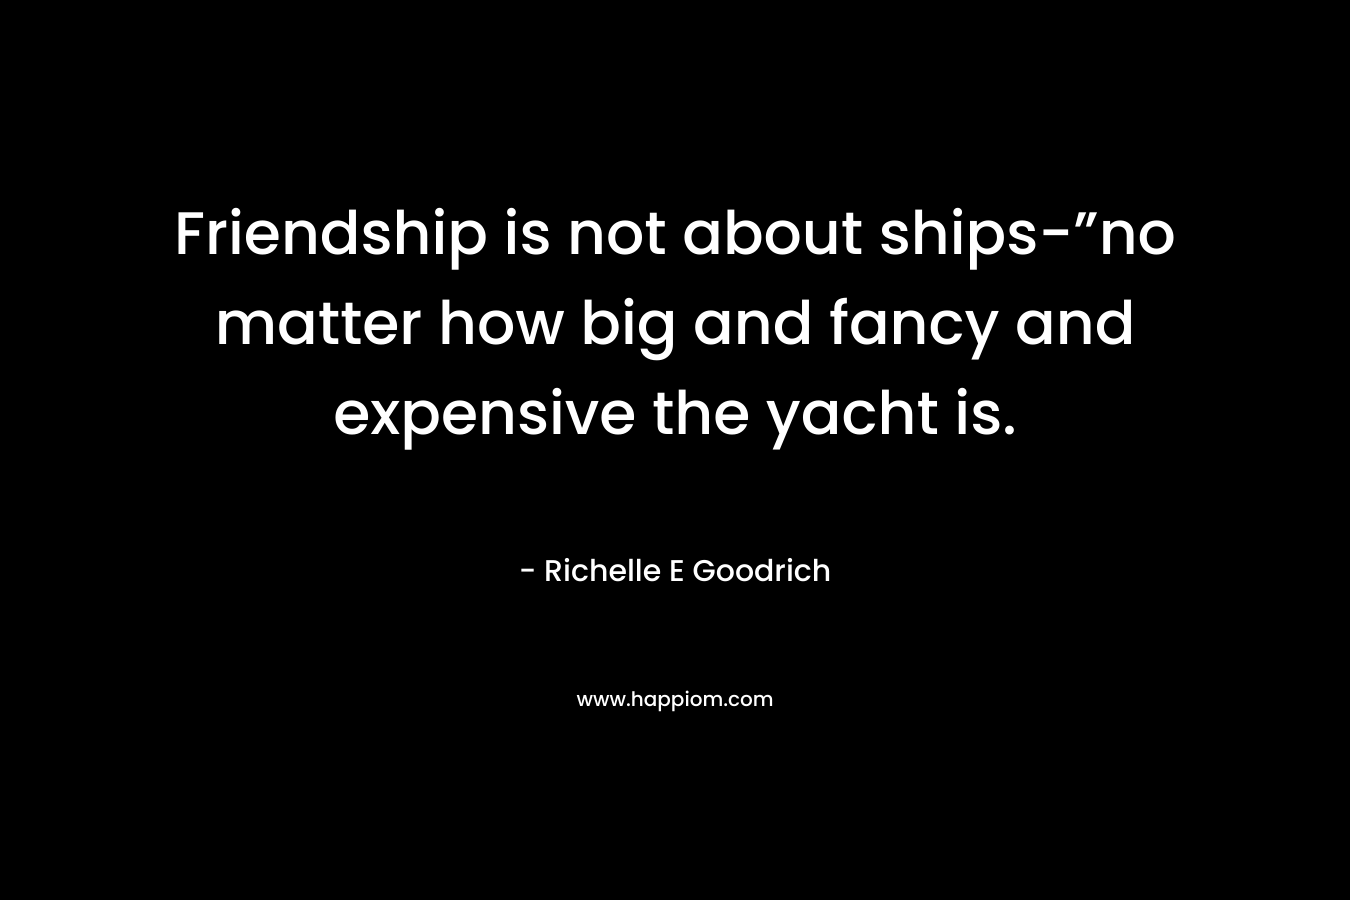 Friendship is not about ships-”no matter how big and fancy and expensive the yacht is.